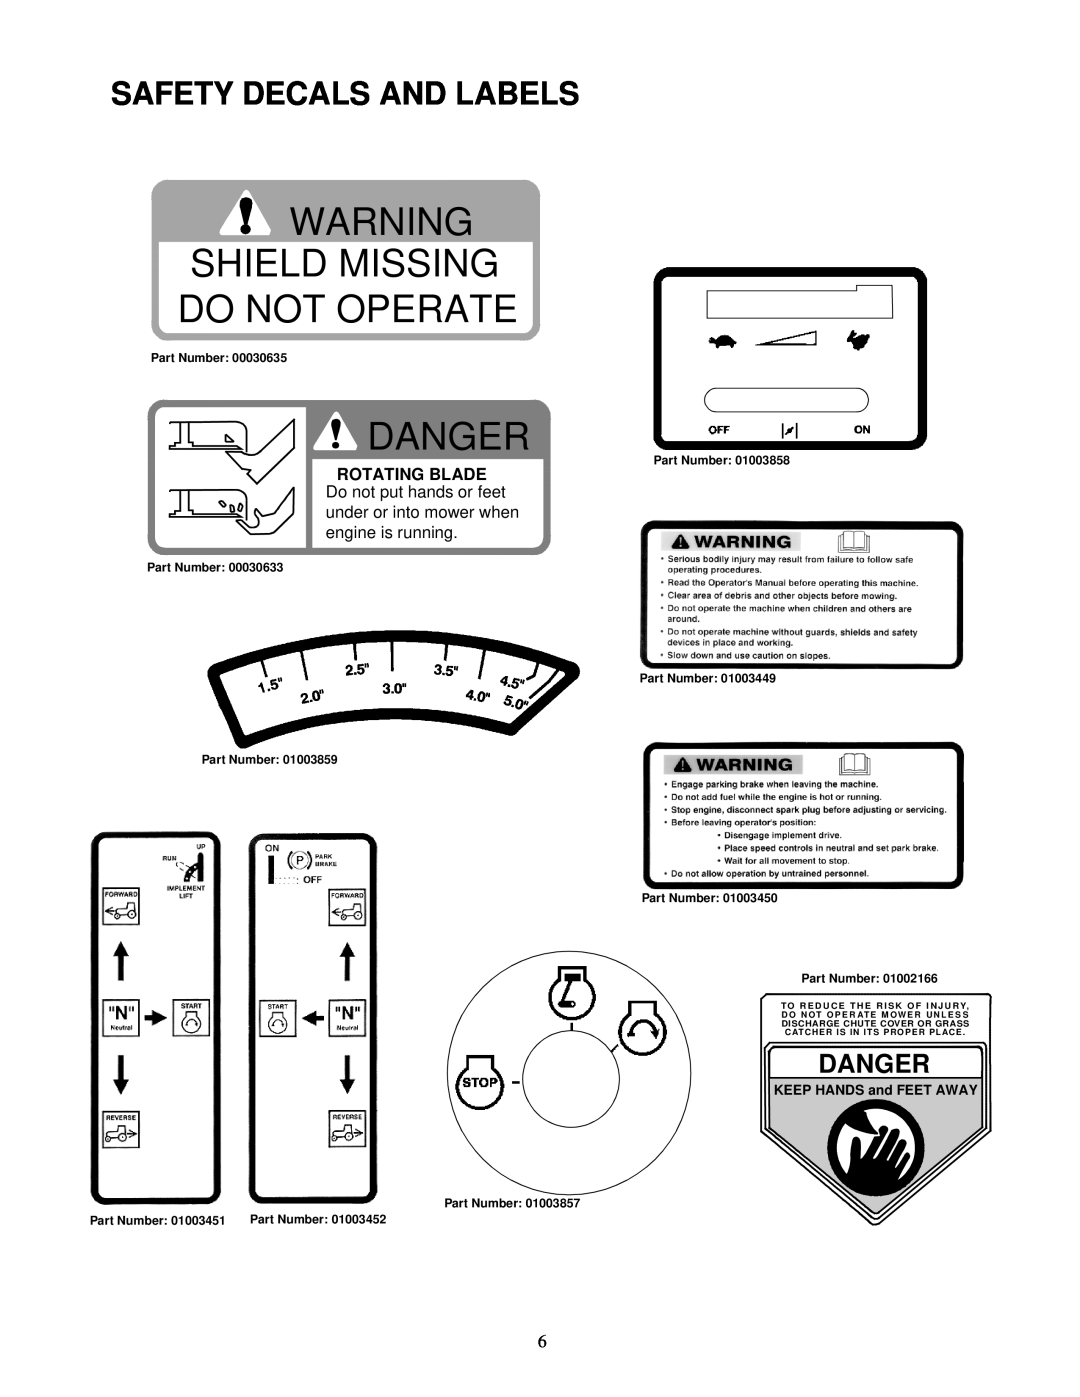 MTD 18HP Safety Decals And Labels, Shield Missing Do Not Operate, Danger, KEEP HANDS and FEET AWAY, Part Number 